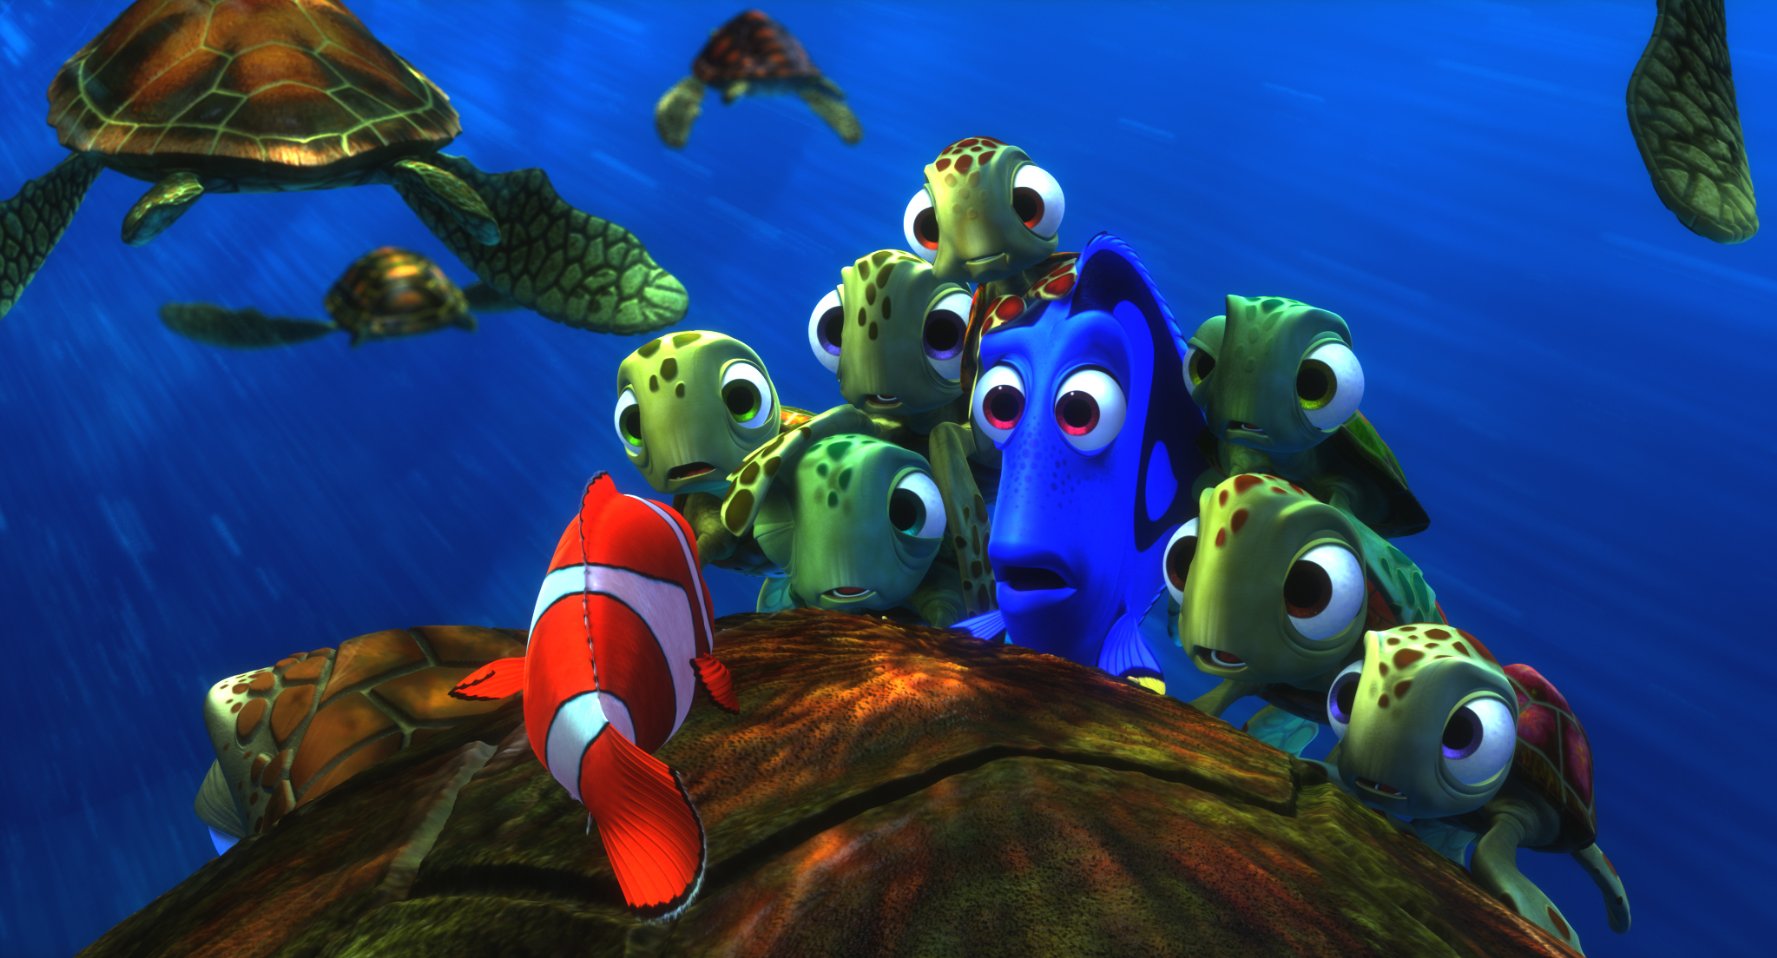 free finding dory movie online